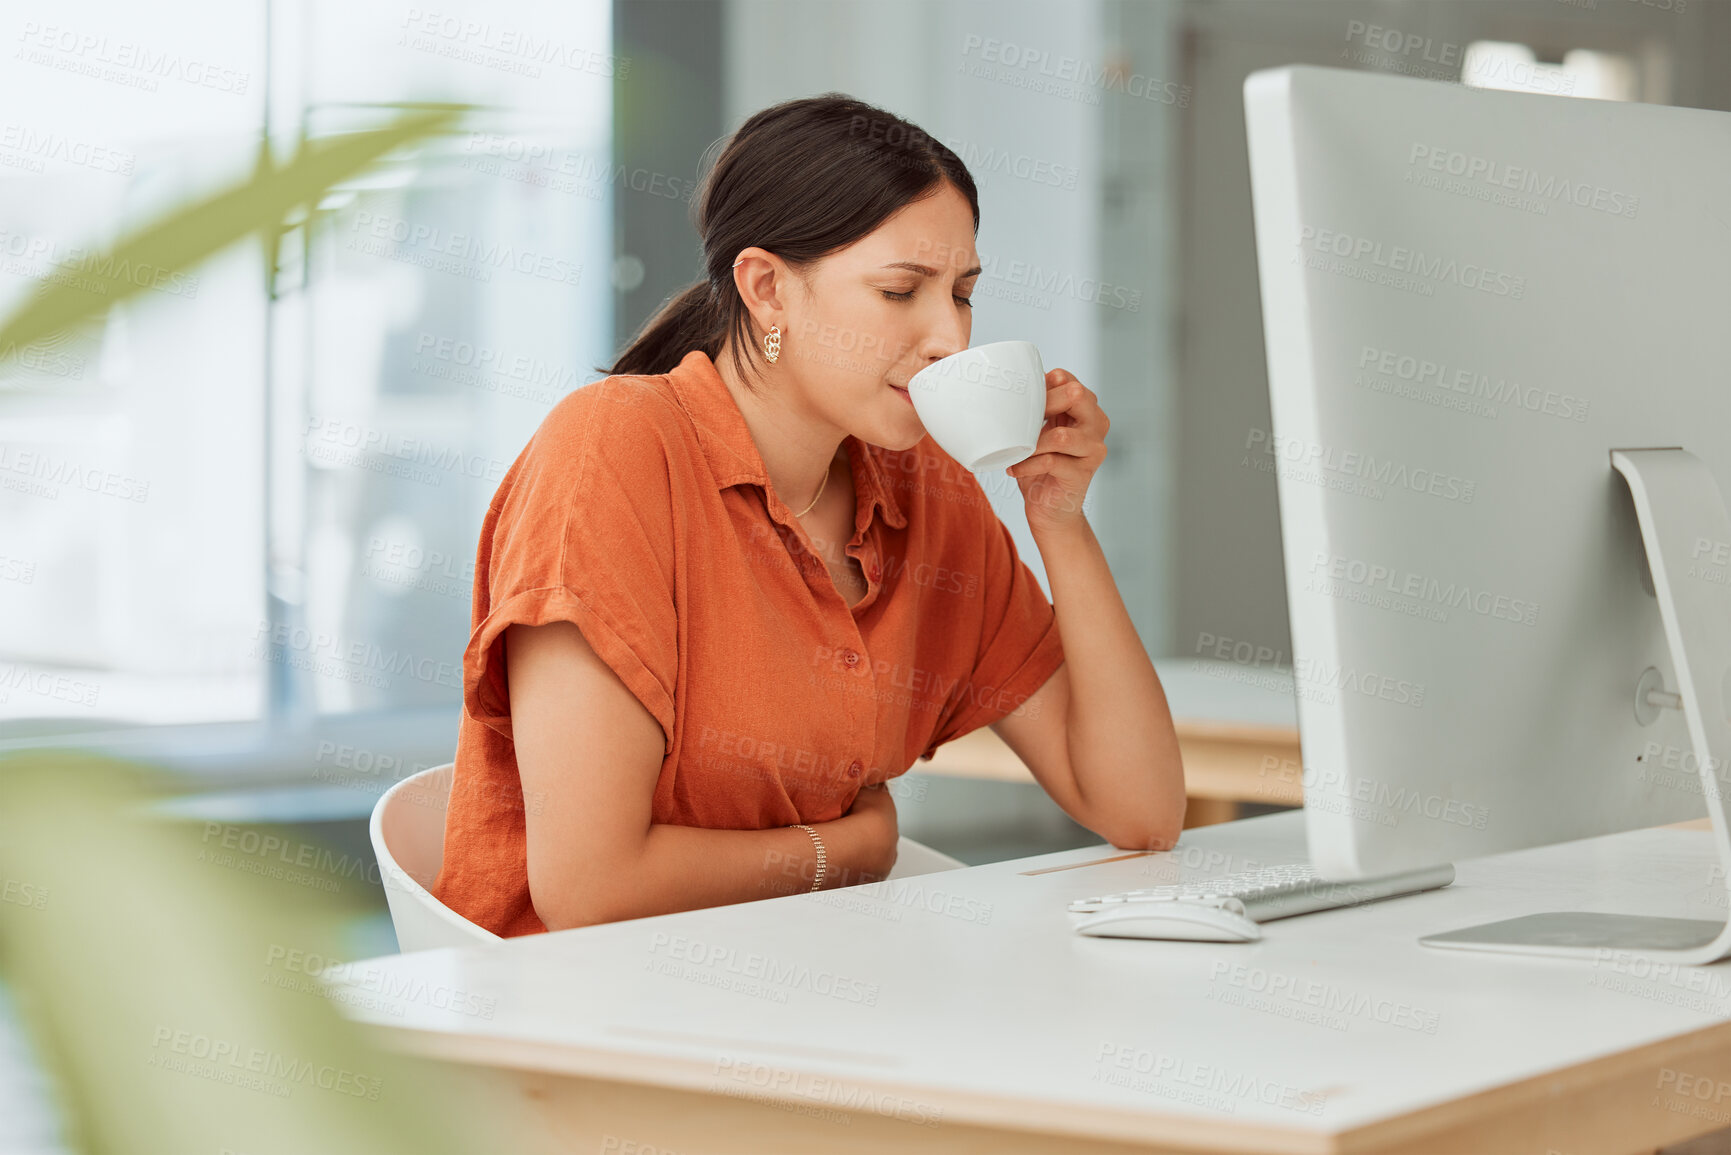 Buy stock photo One hispanic business woman drinking warm tea as a remedy for sore tummy while feeling ill with menstrual stomach cramps in an office. Sick employee on period taking medicine for bloated and uncomfortable digestive pain caused by stress and anxiety